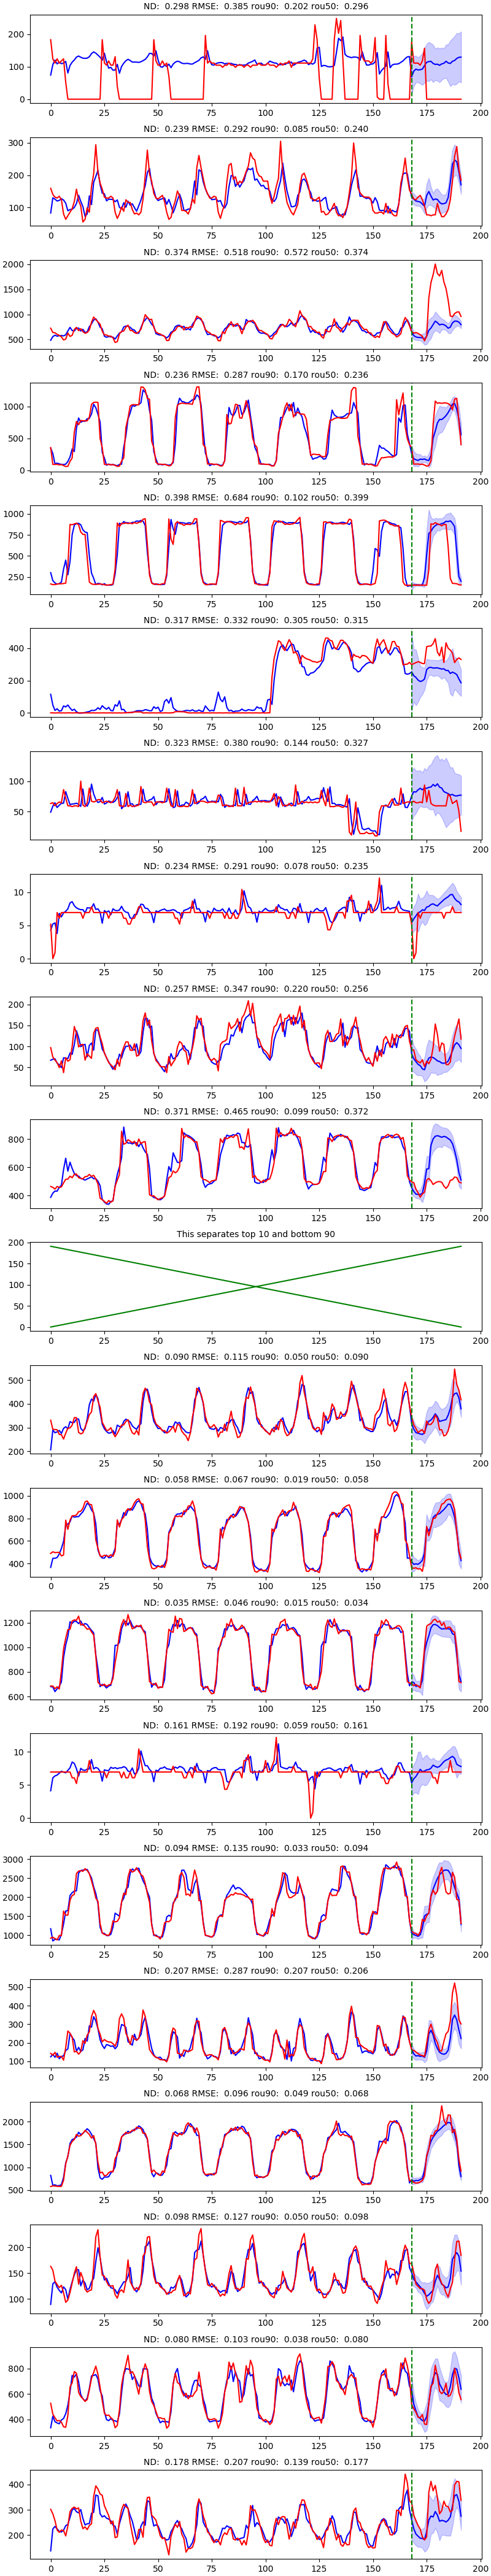 Sample results on electricity. The top 10 plots are sampled from the test set with the highest 10% ND values, whereas the bottom 10 plots are sampled from the rest of the test set.